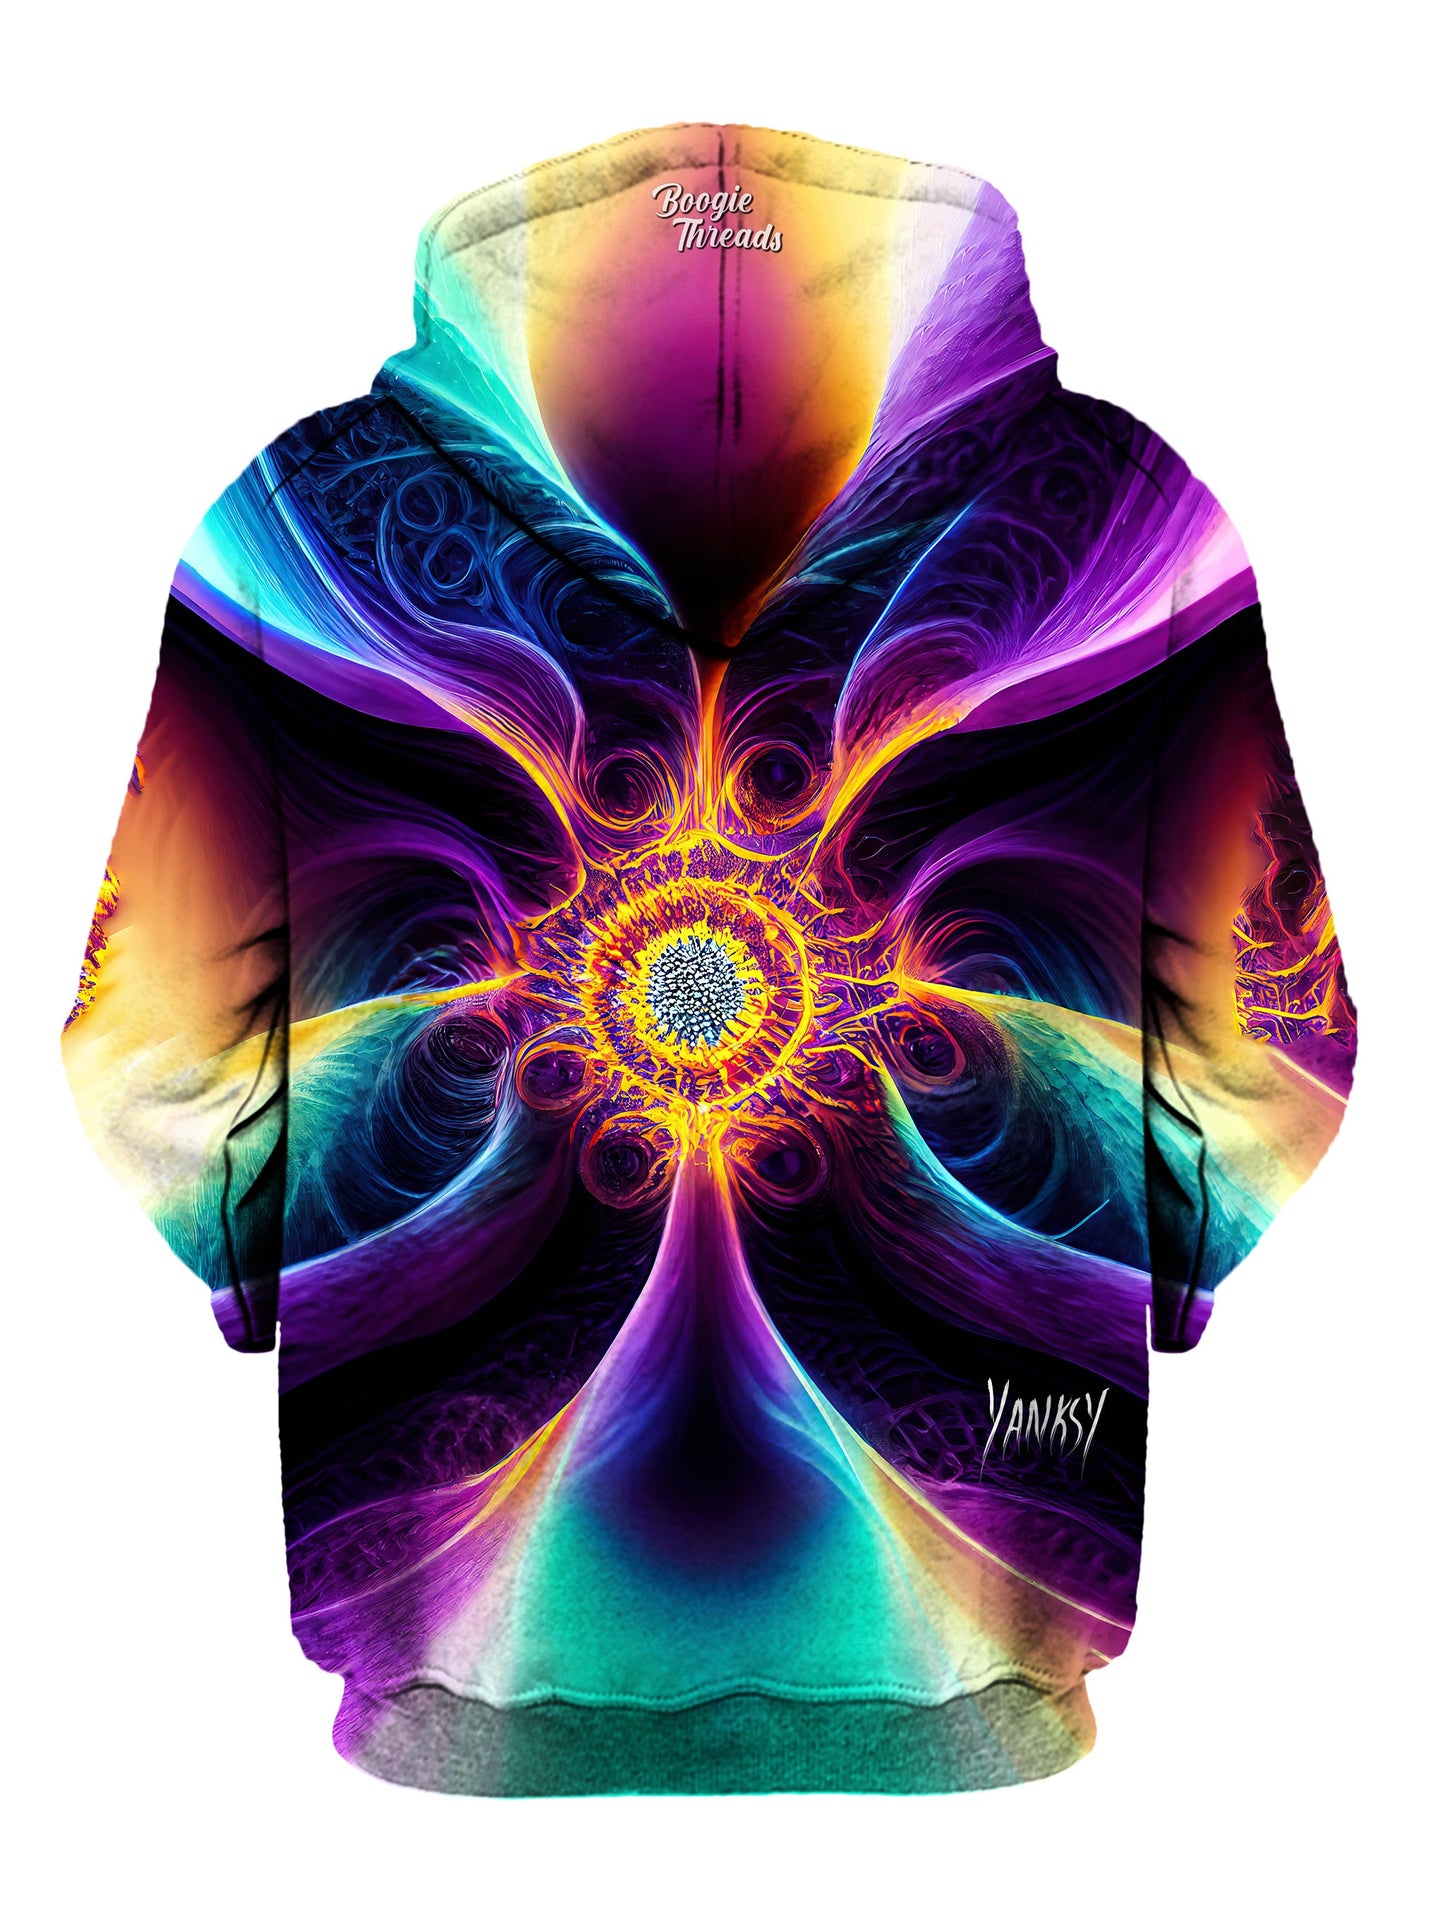 Get ready to dance the night away in this comfortable pullover hoodie